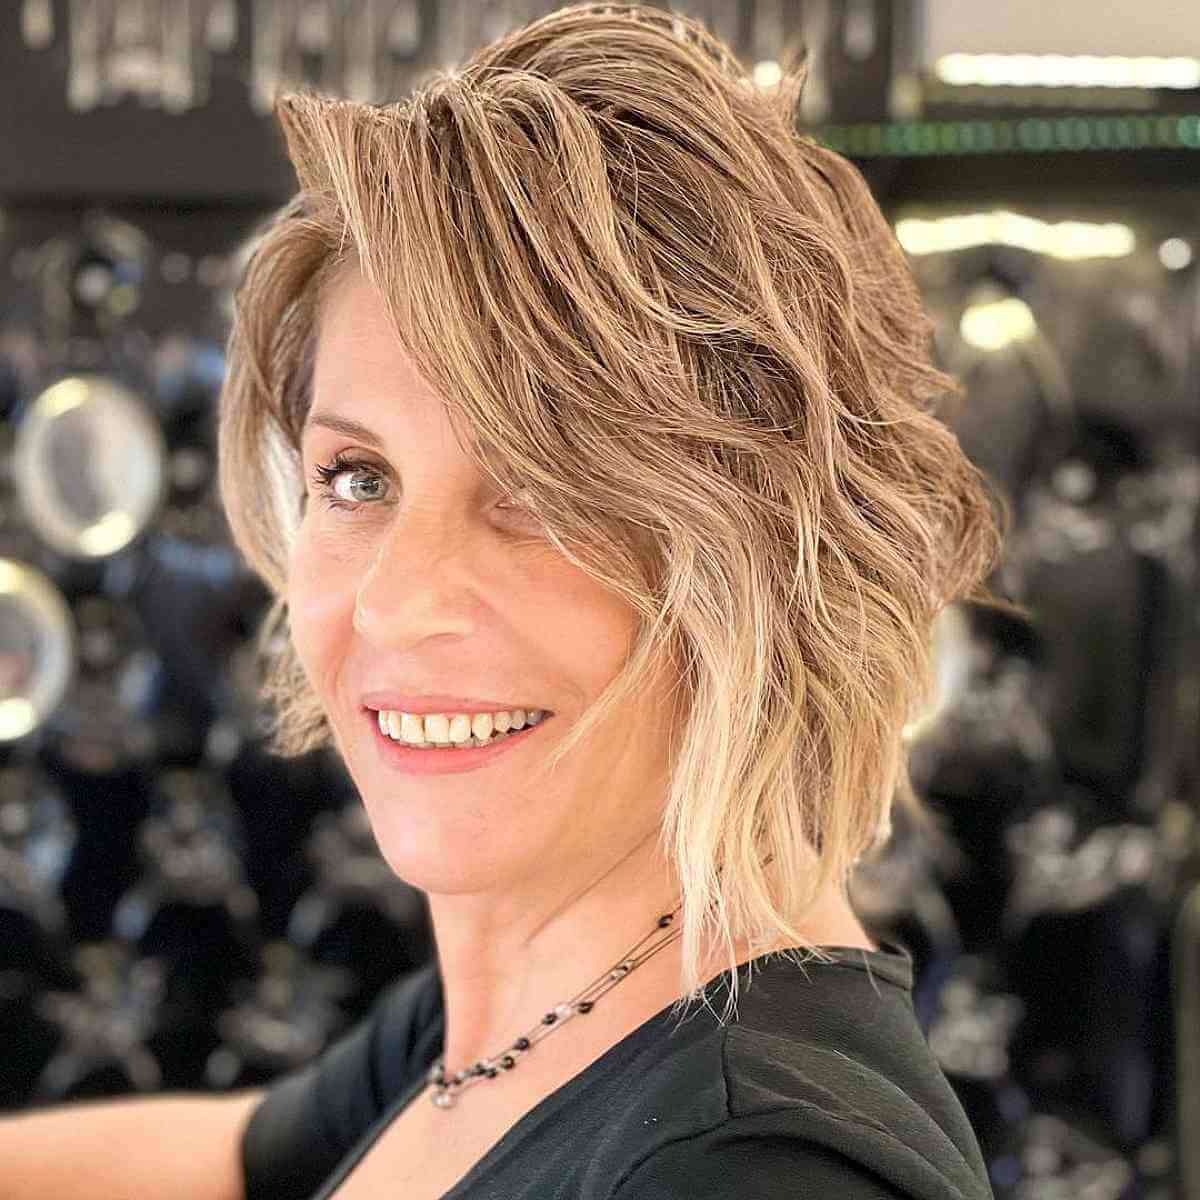 Short-Length Heavily Layered Cut for Women Over 50 with Thicker Hair